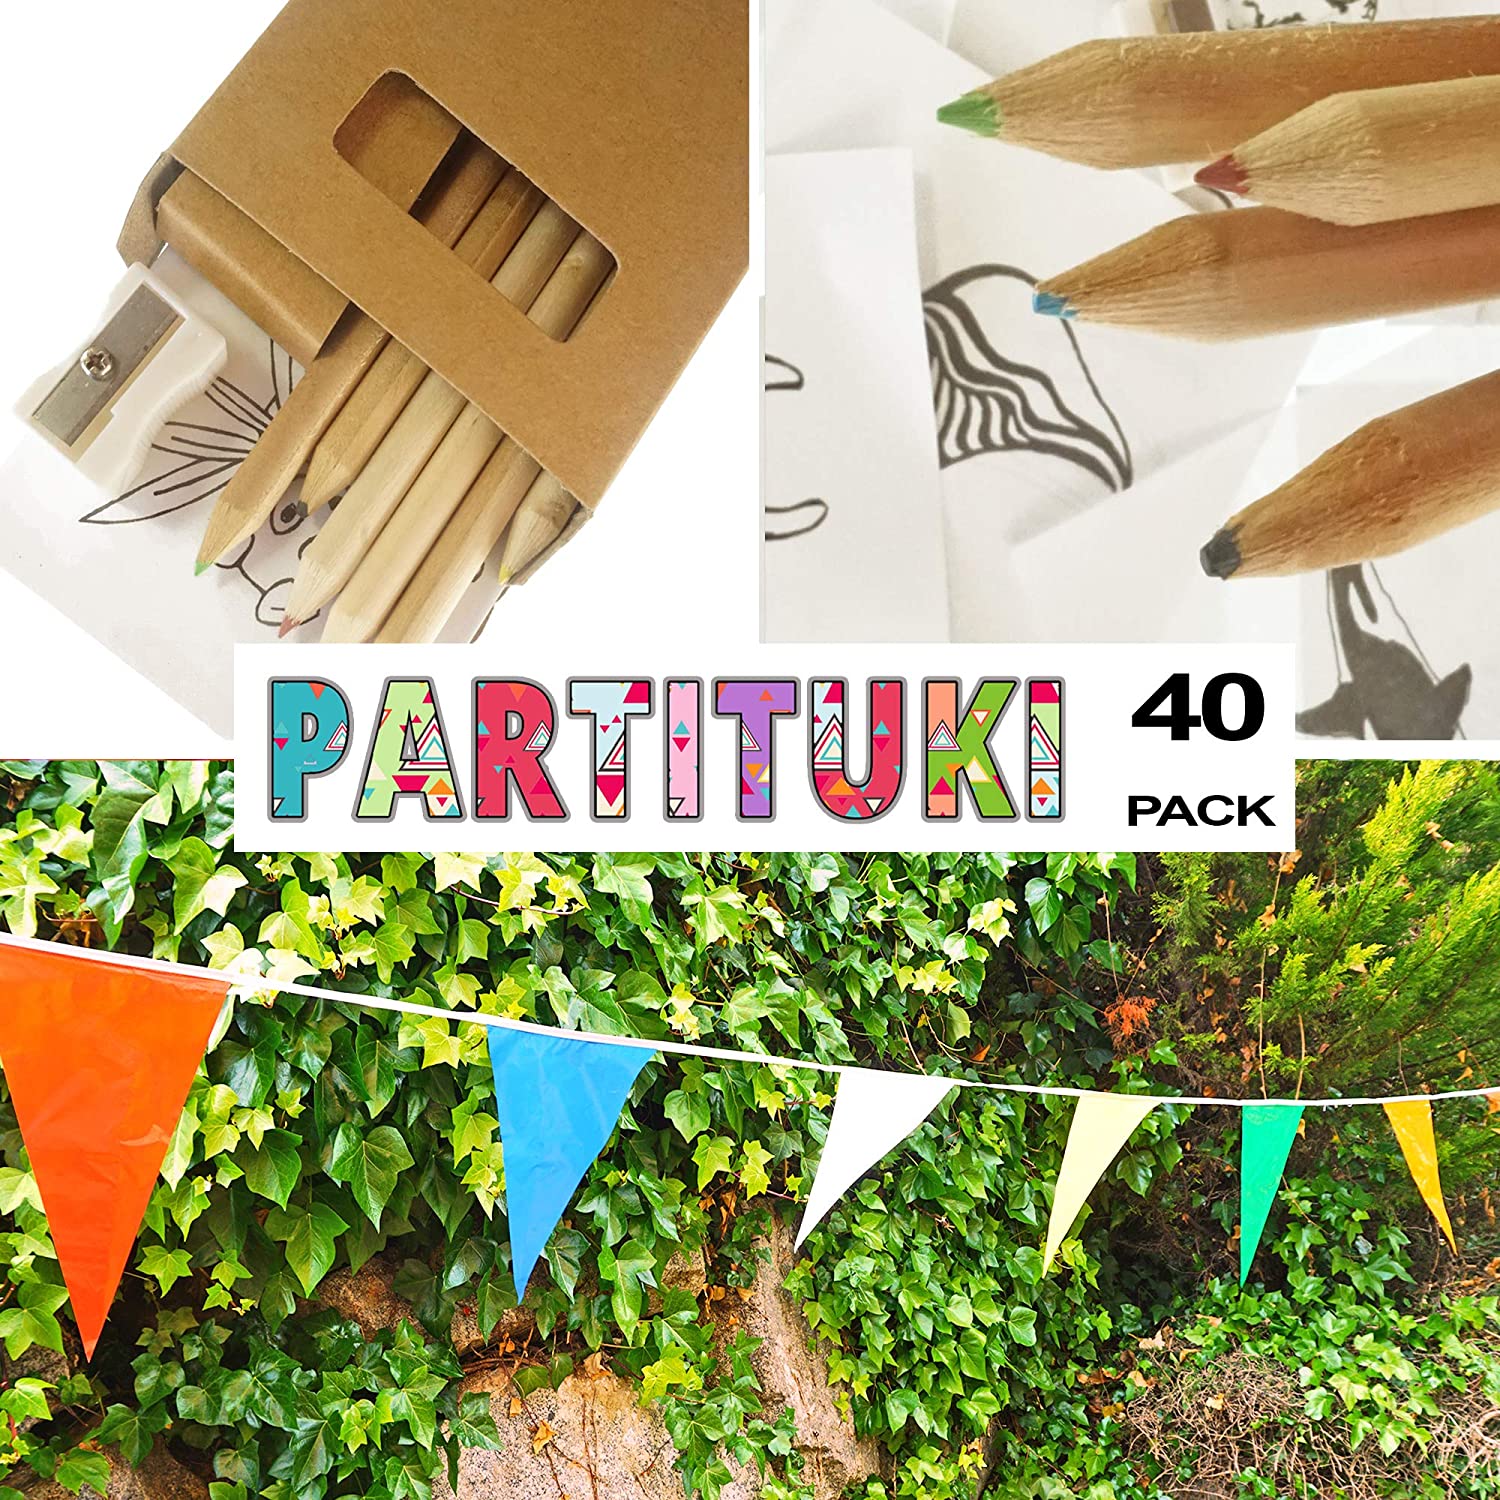 Include a 3mts Garland for Decoration Enjoy painting. Partituki 25 Sets of Colored Pencils for Kids Make your party the funniest